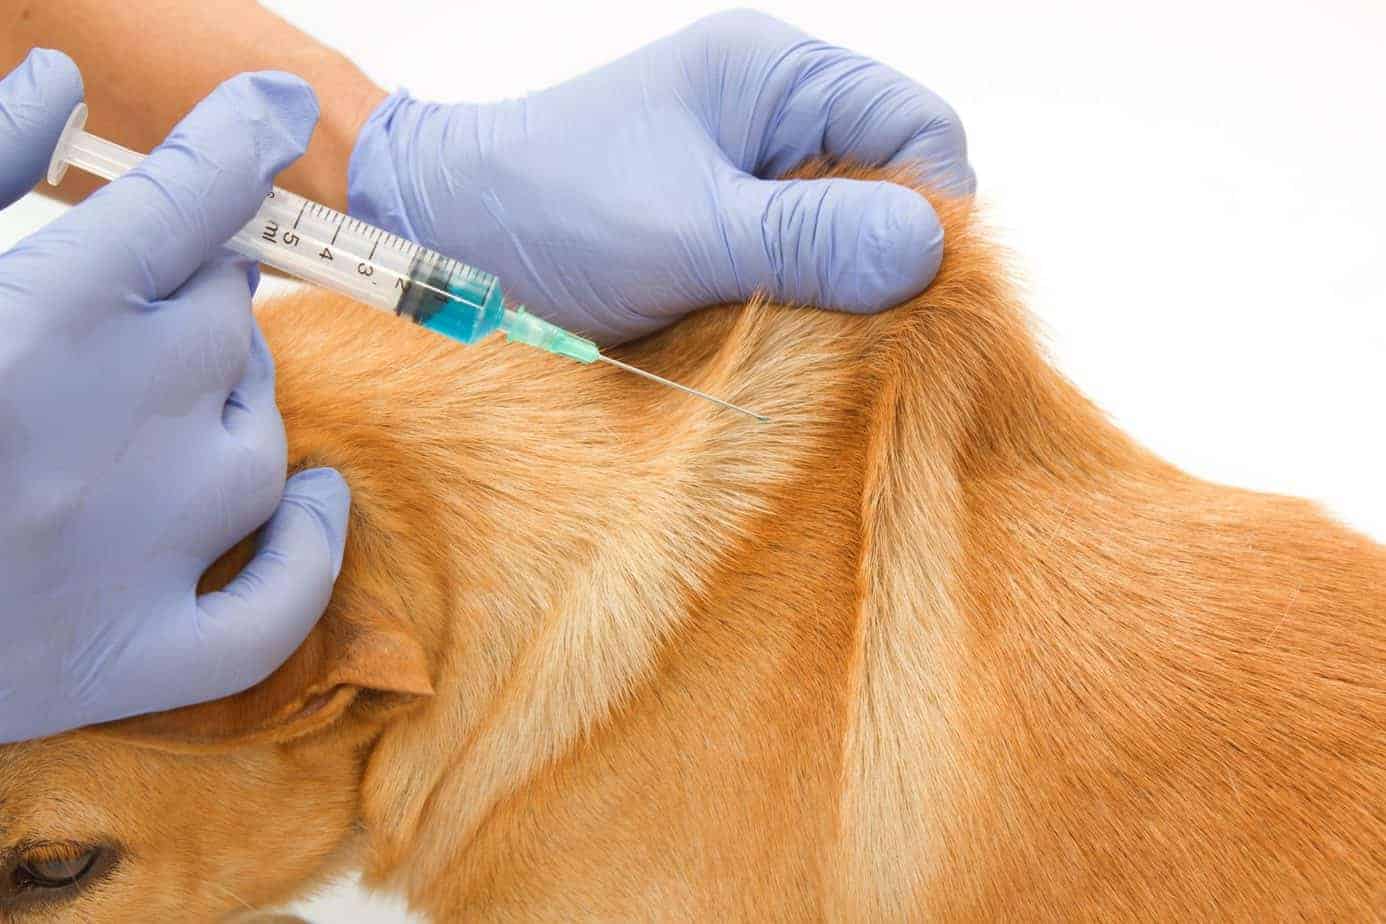 Dog vaccines Rabies, Parvo, Distemper, and more